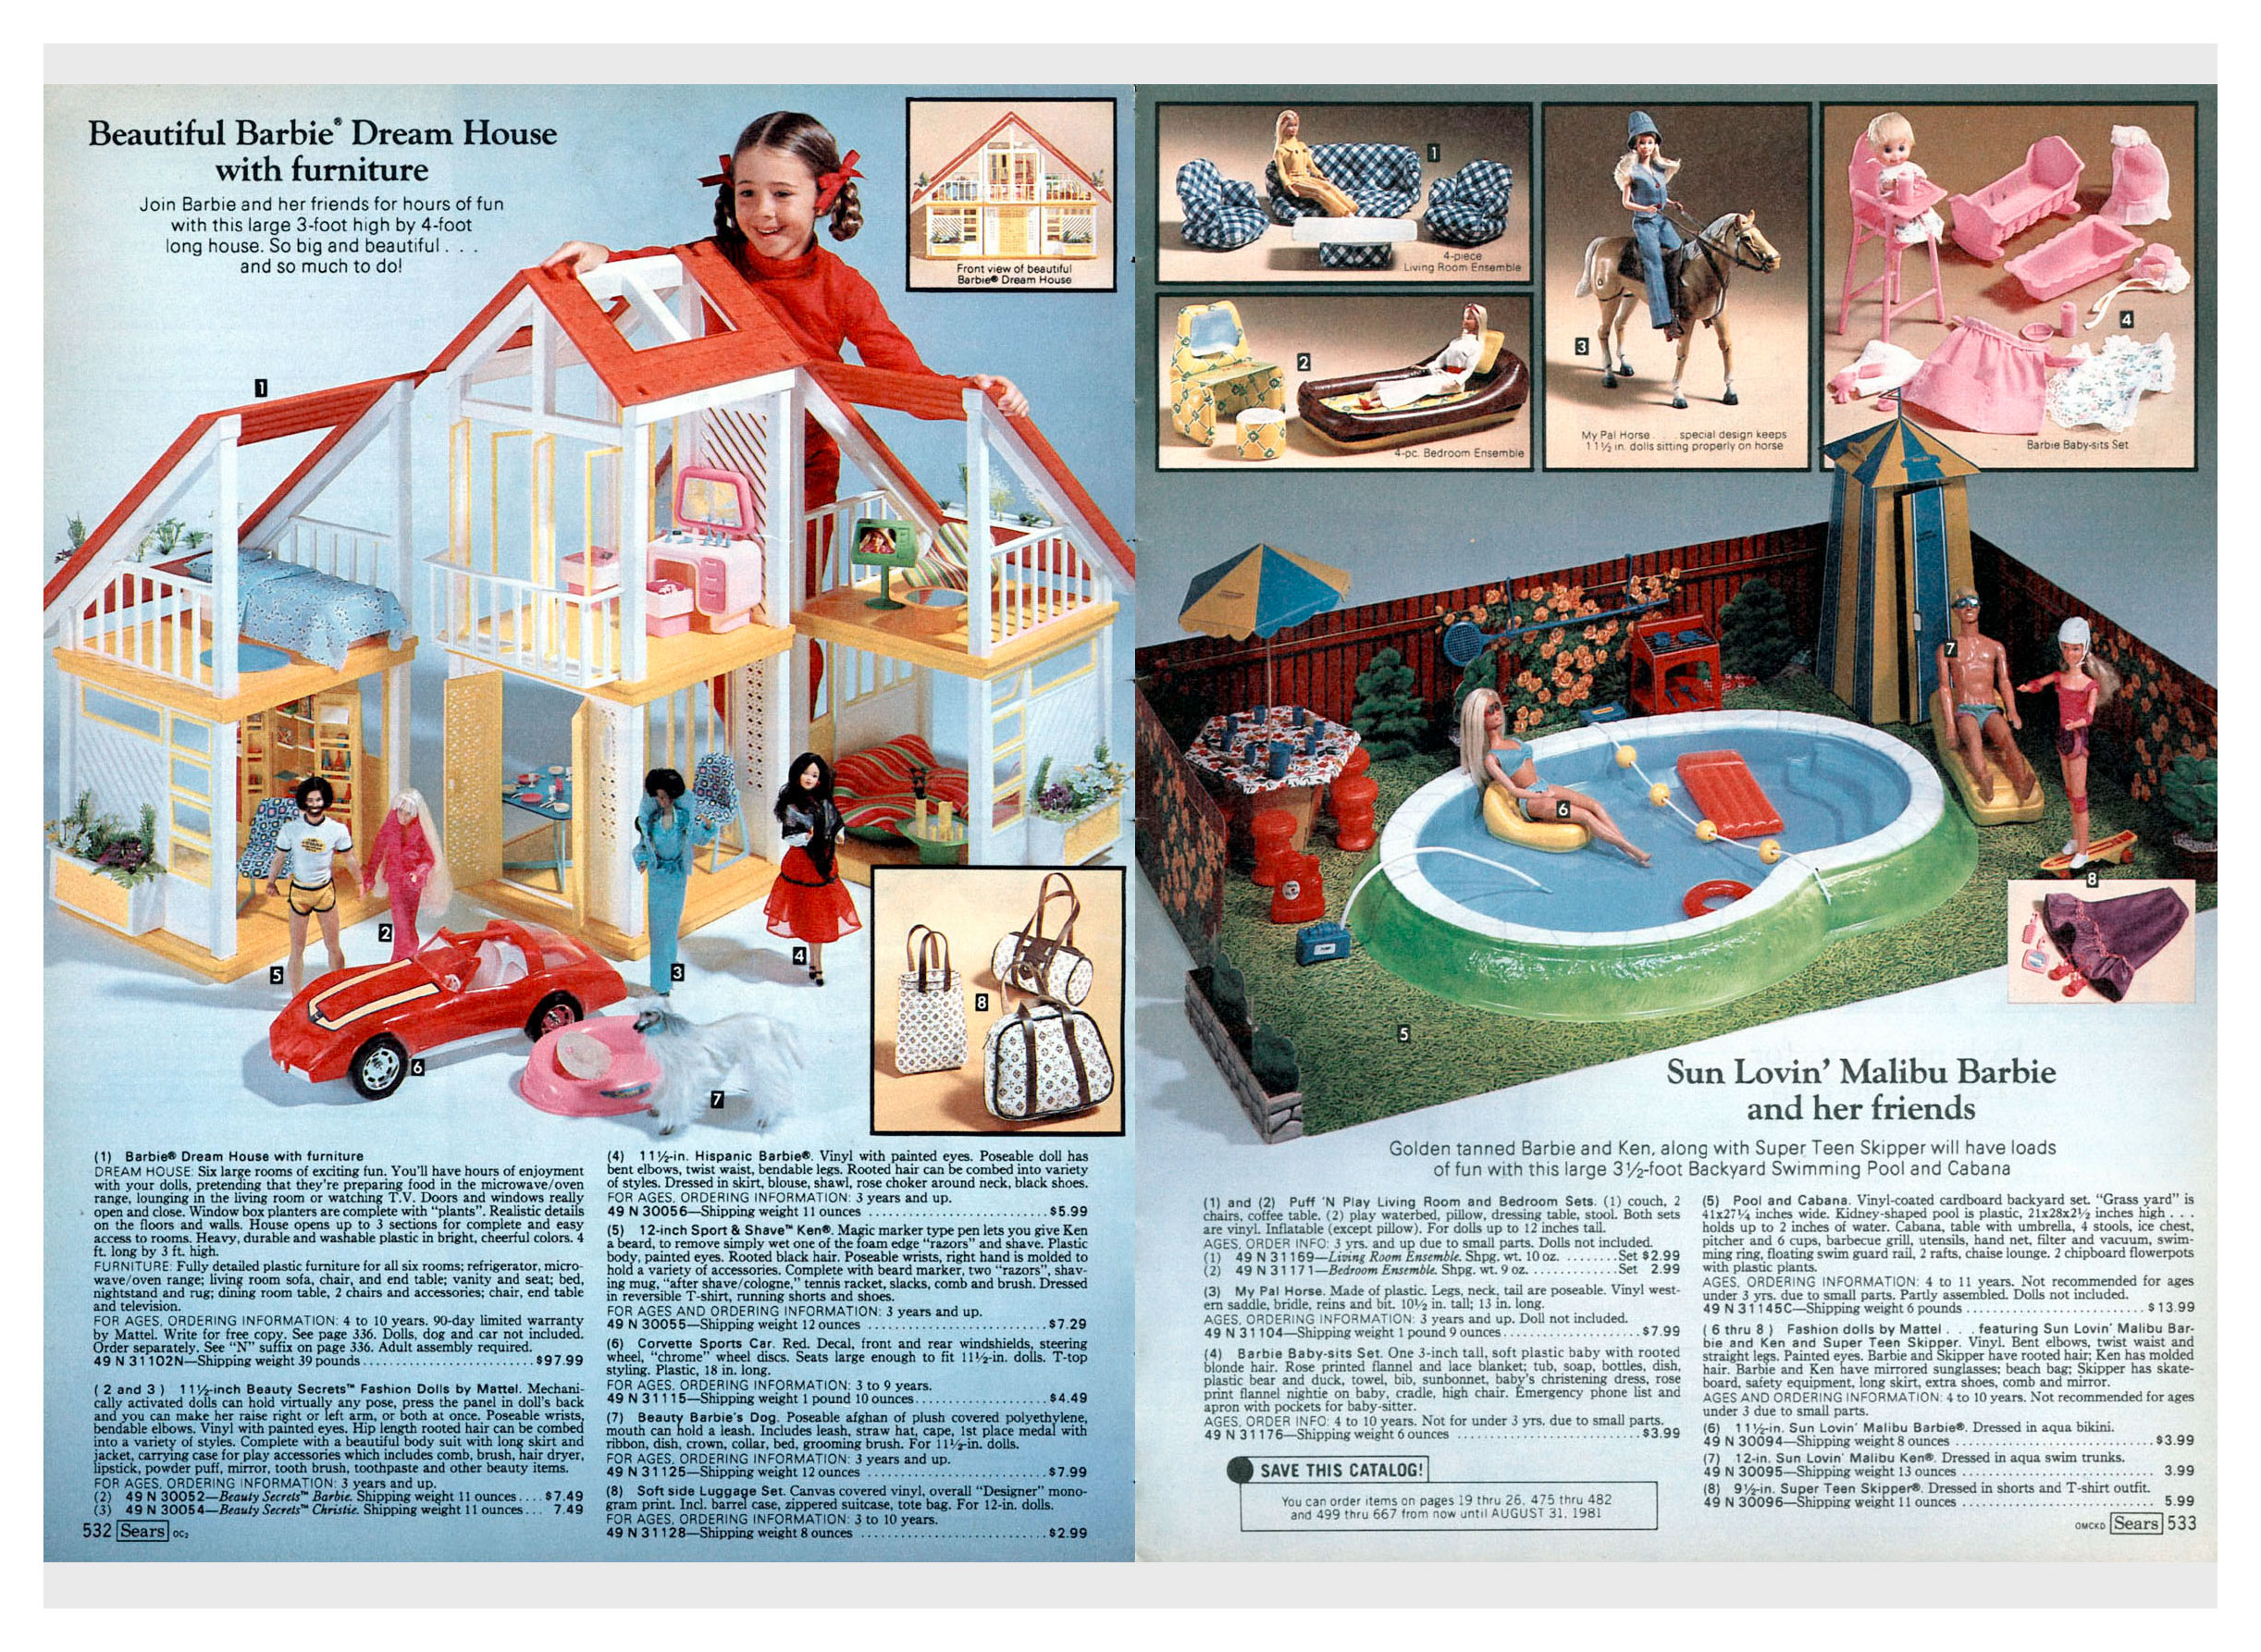 From 1980 Sears Wish Book